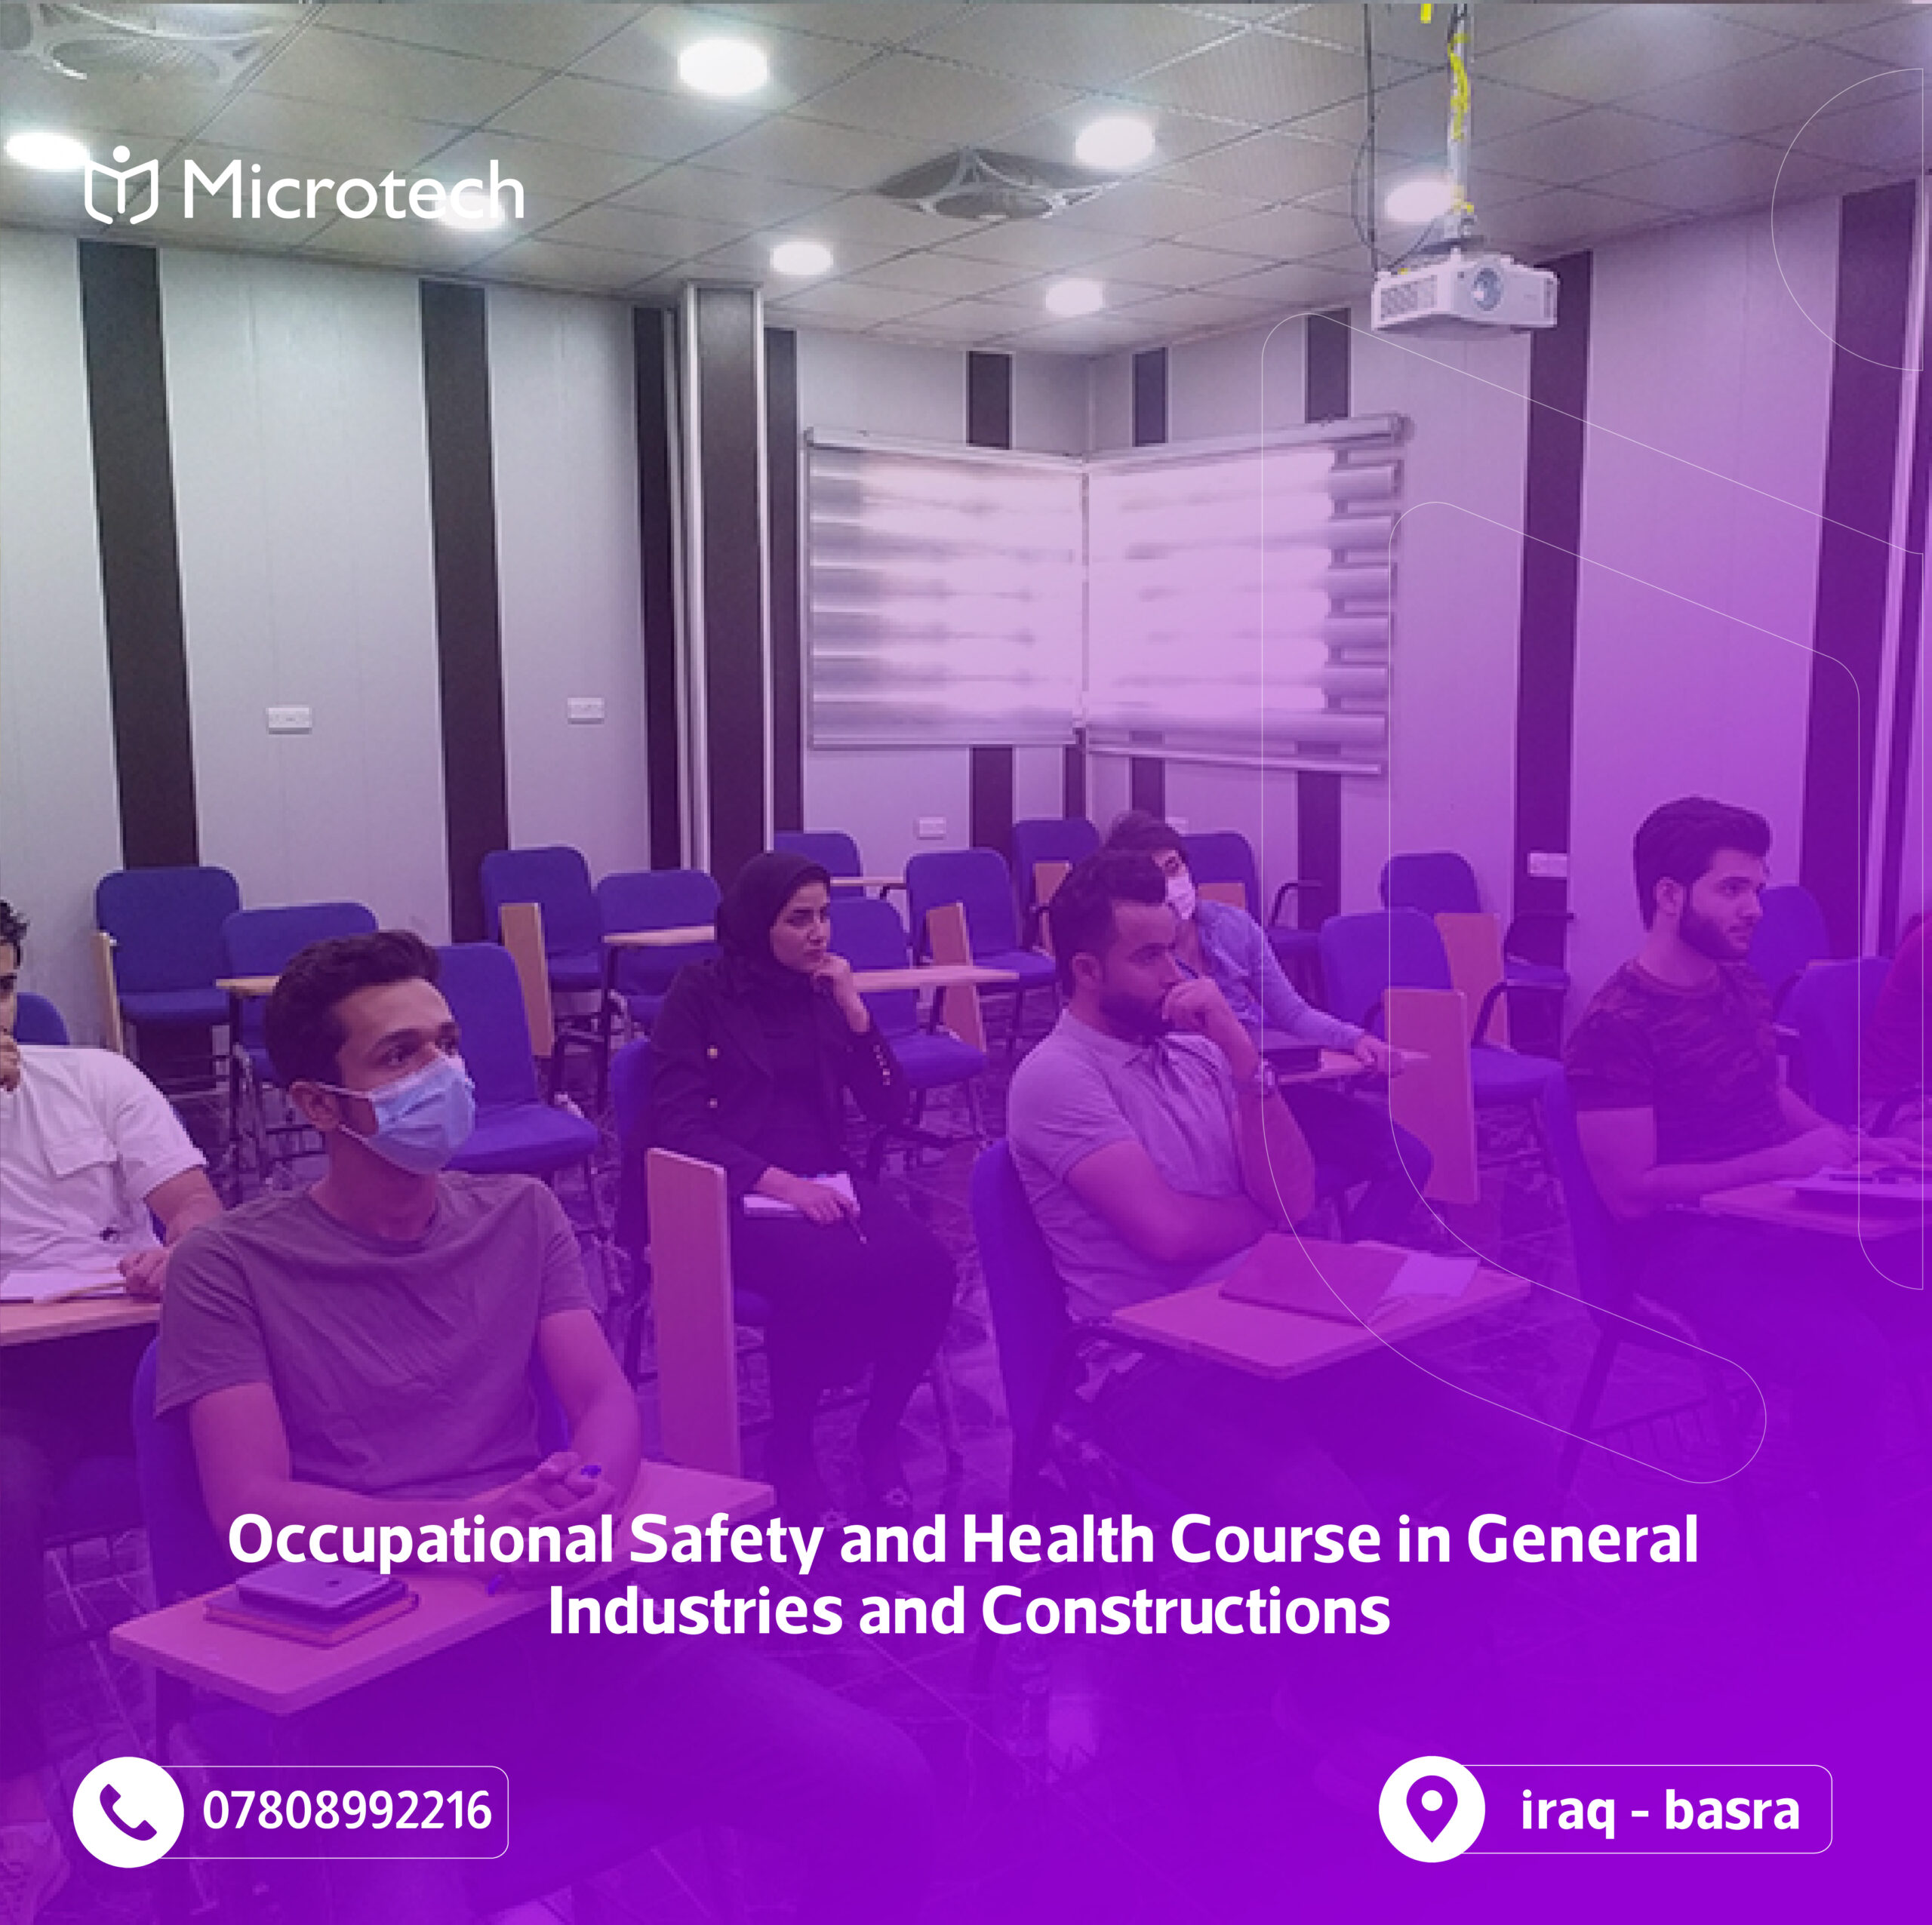 Occupational Safety and Health Course in General Industries and Constructions